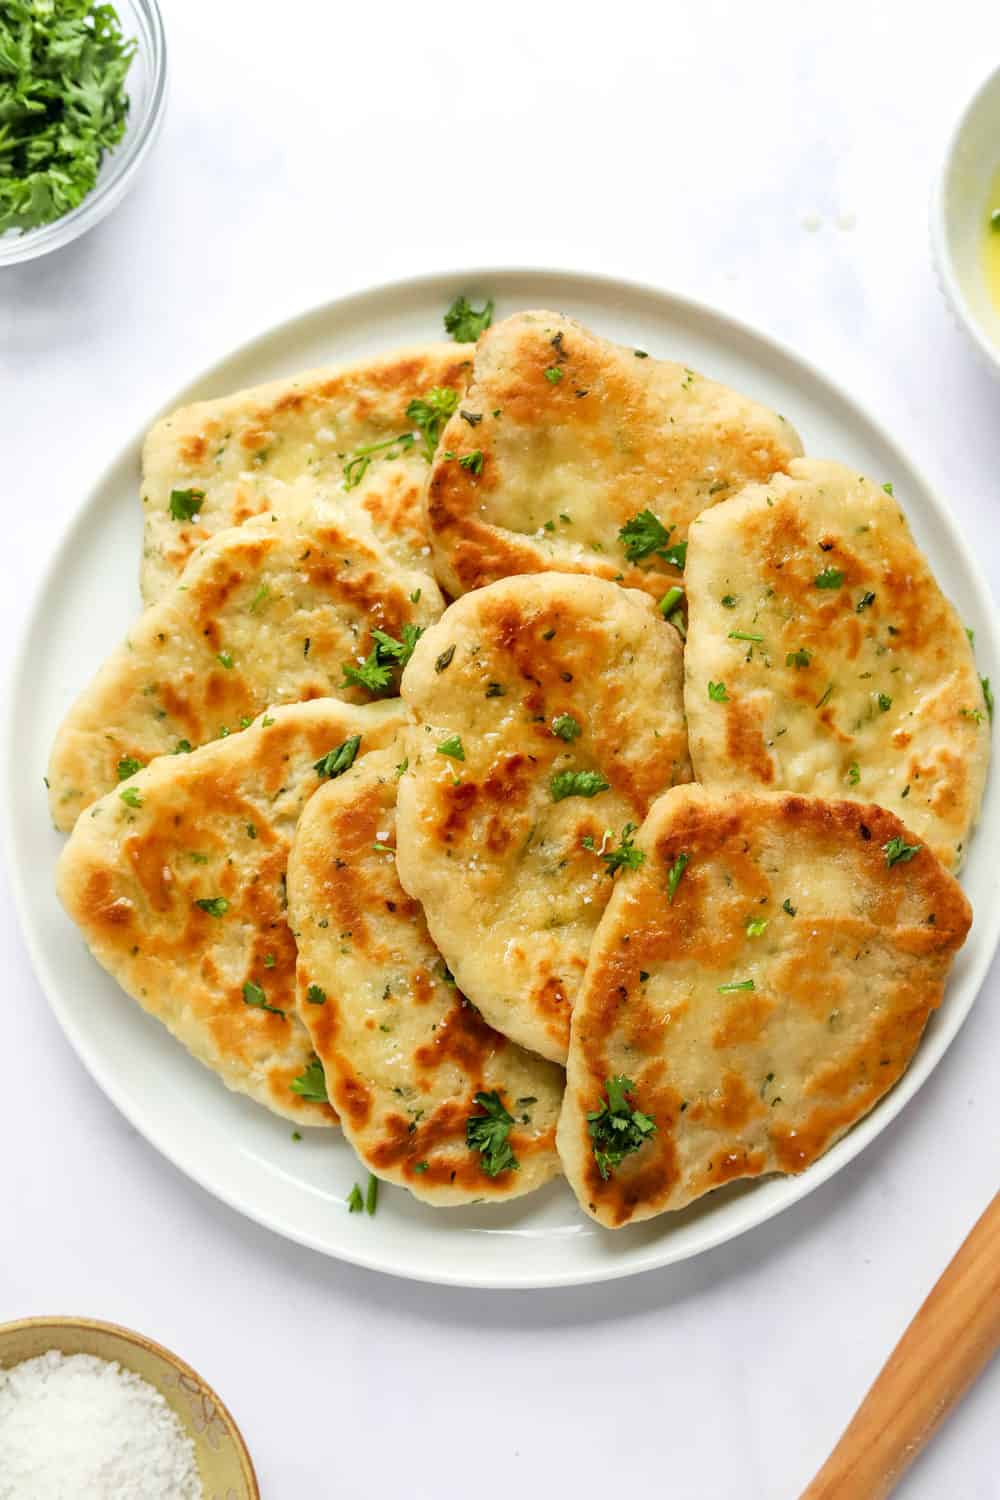 Plate full of naan bread with a bowl of parsley behind it. 